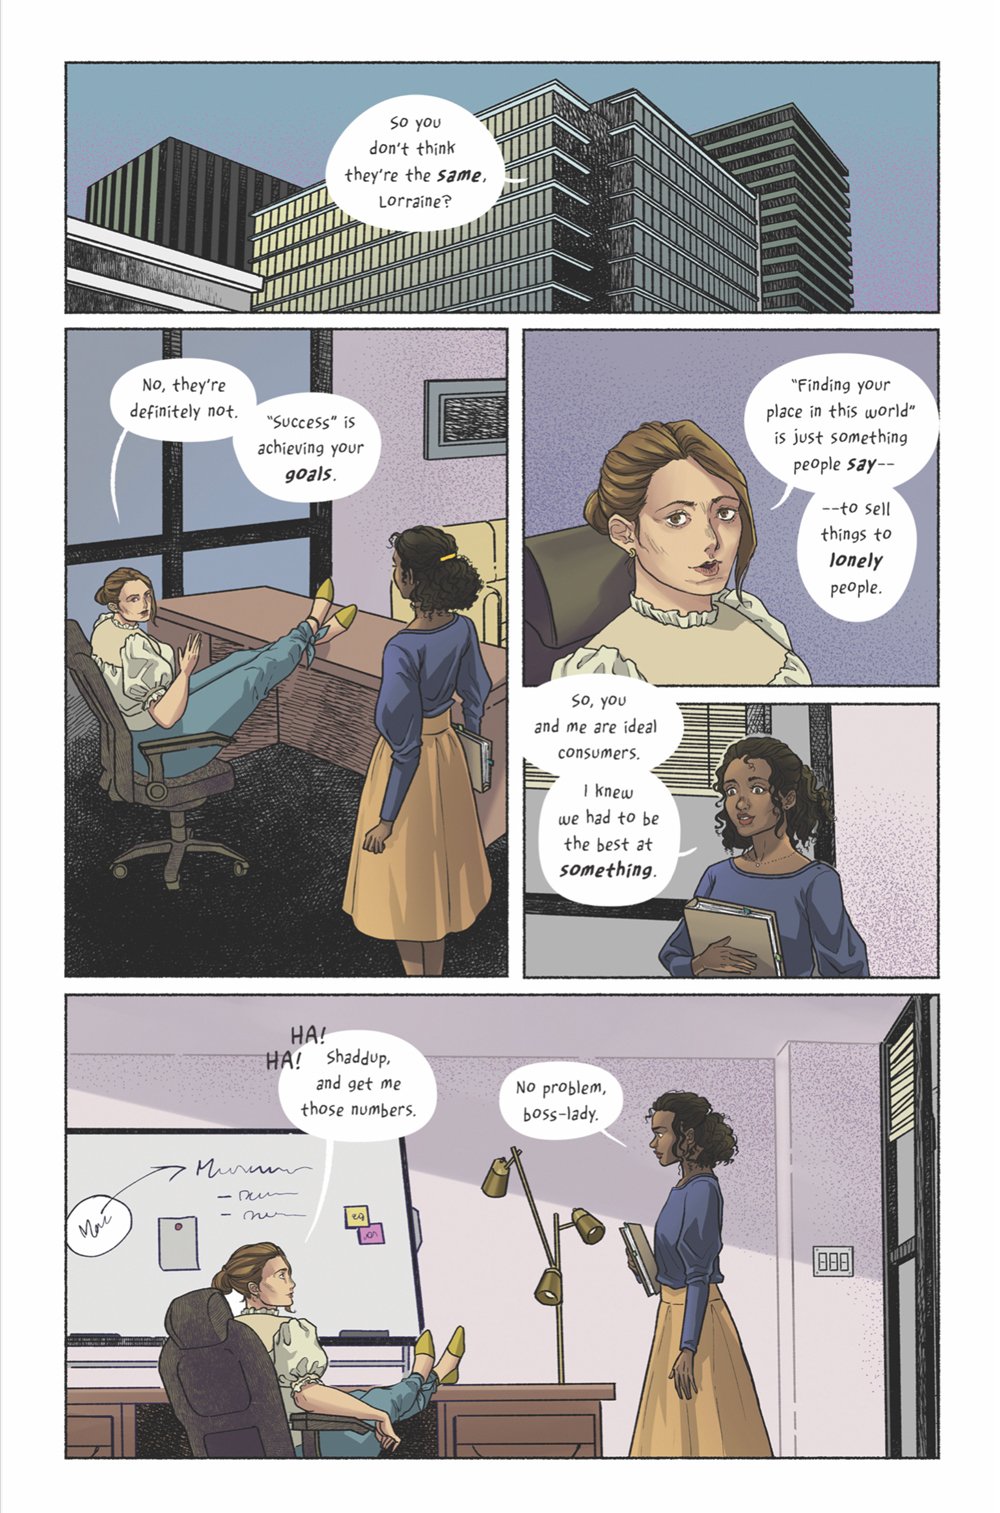 Page for "Grieving Mall" by graphic novelist R. Alan Brooks and artist Sarah Menzel Trapl.